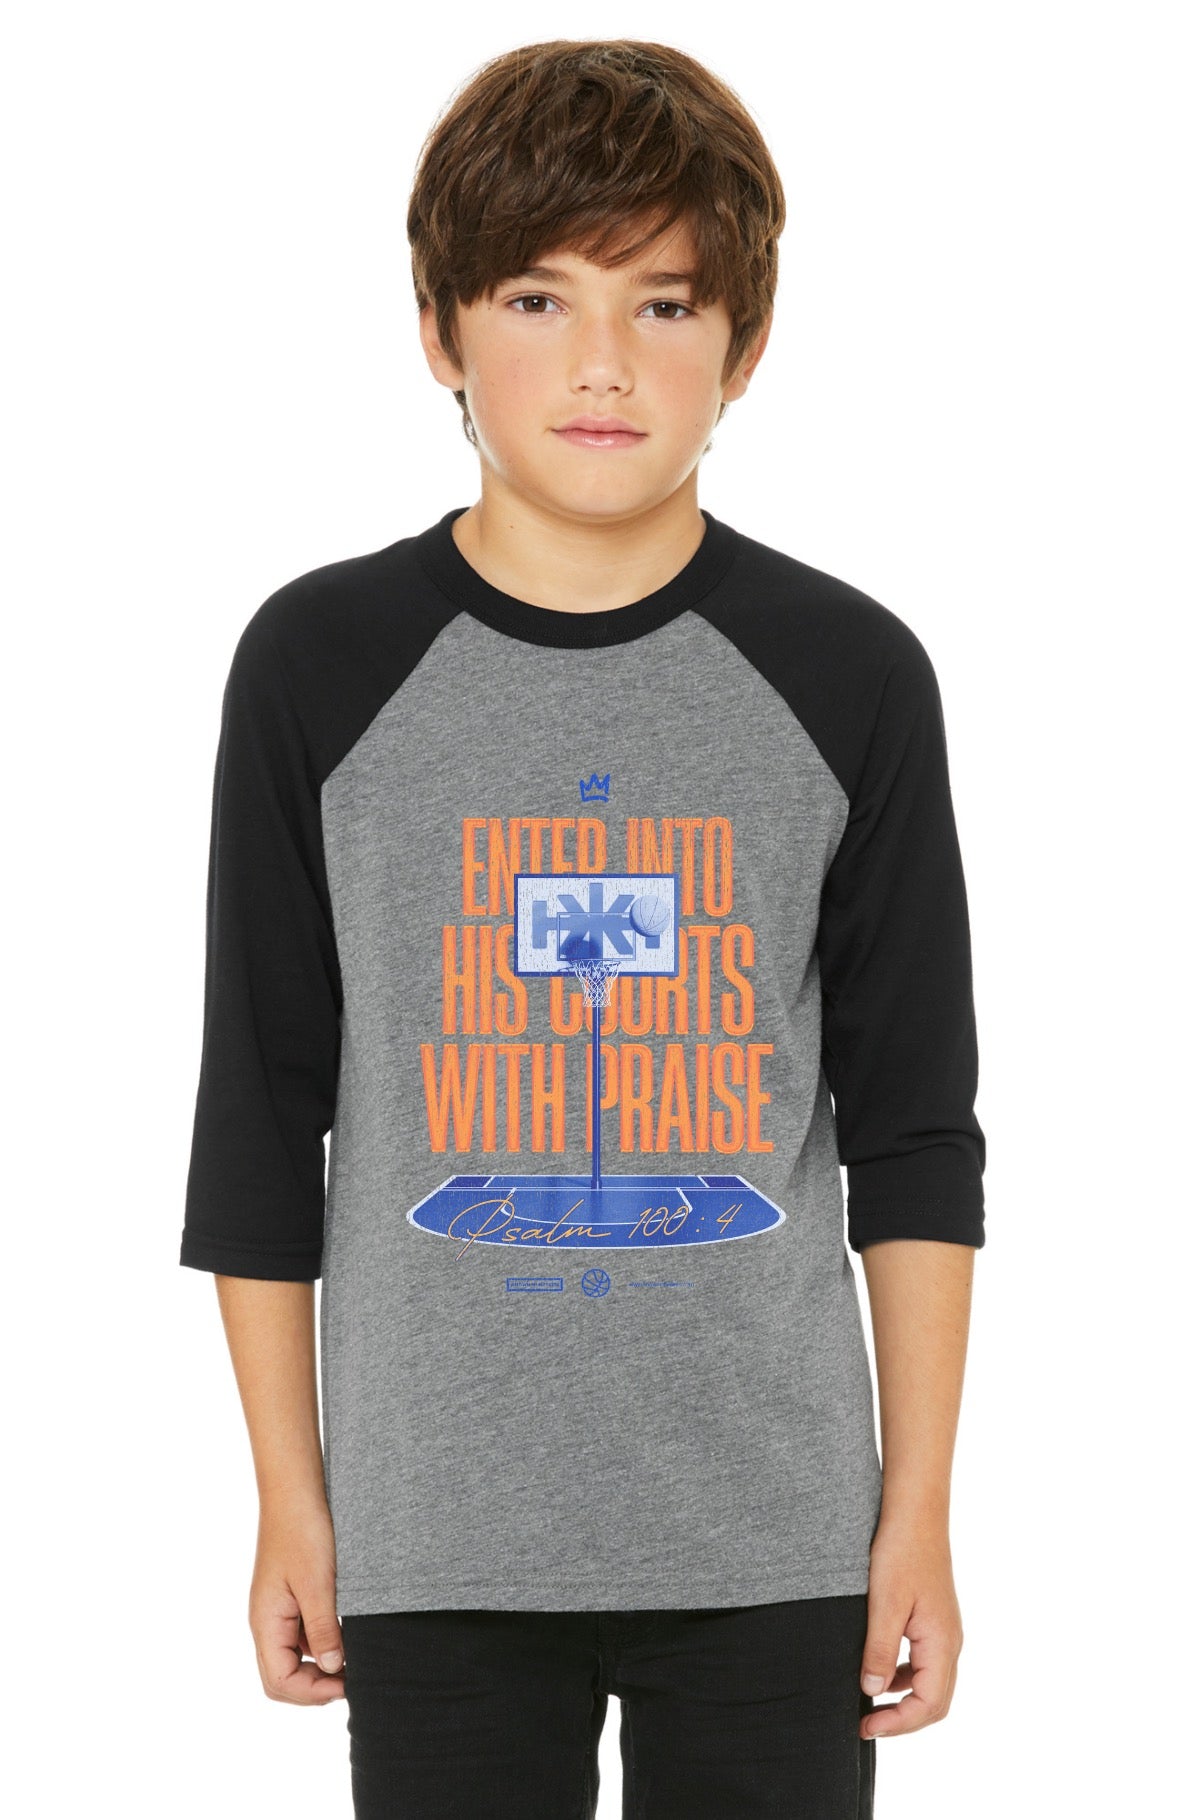 Enter Into His Courts - Youth Raglan Tee